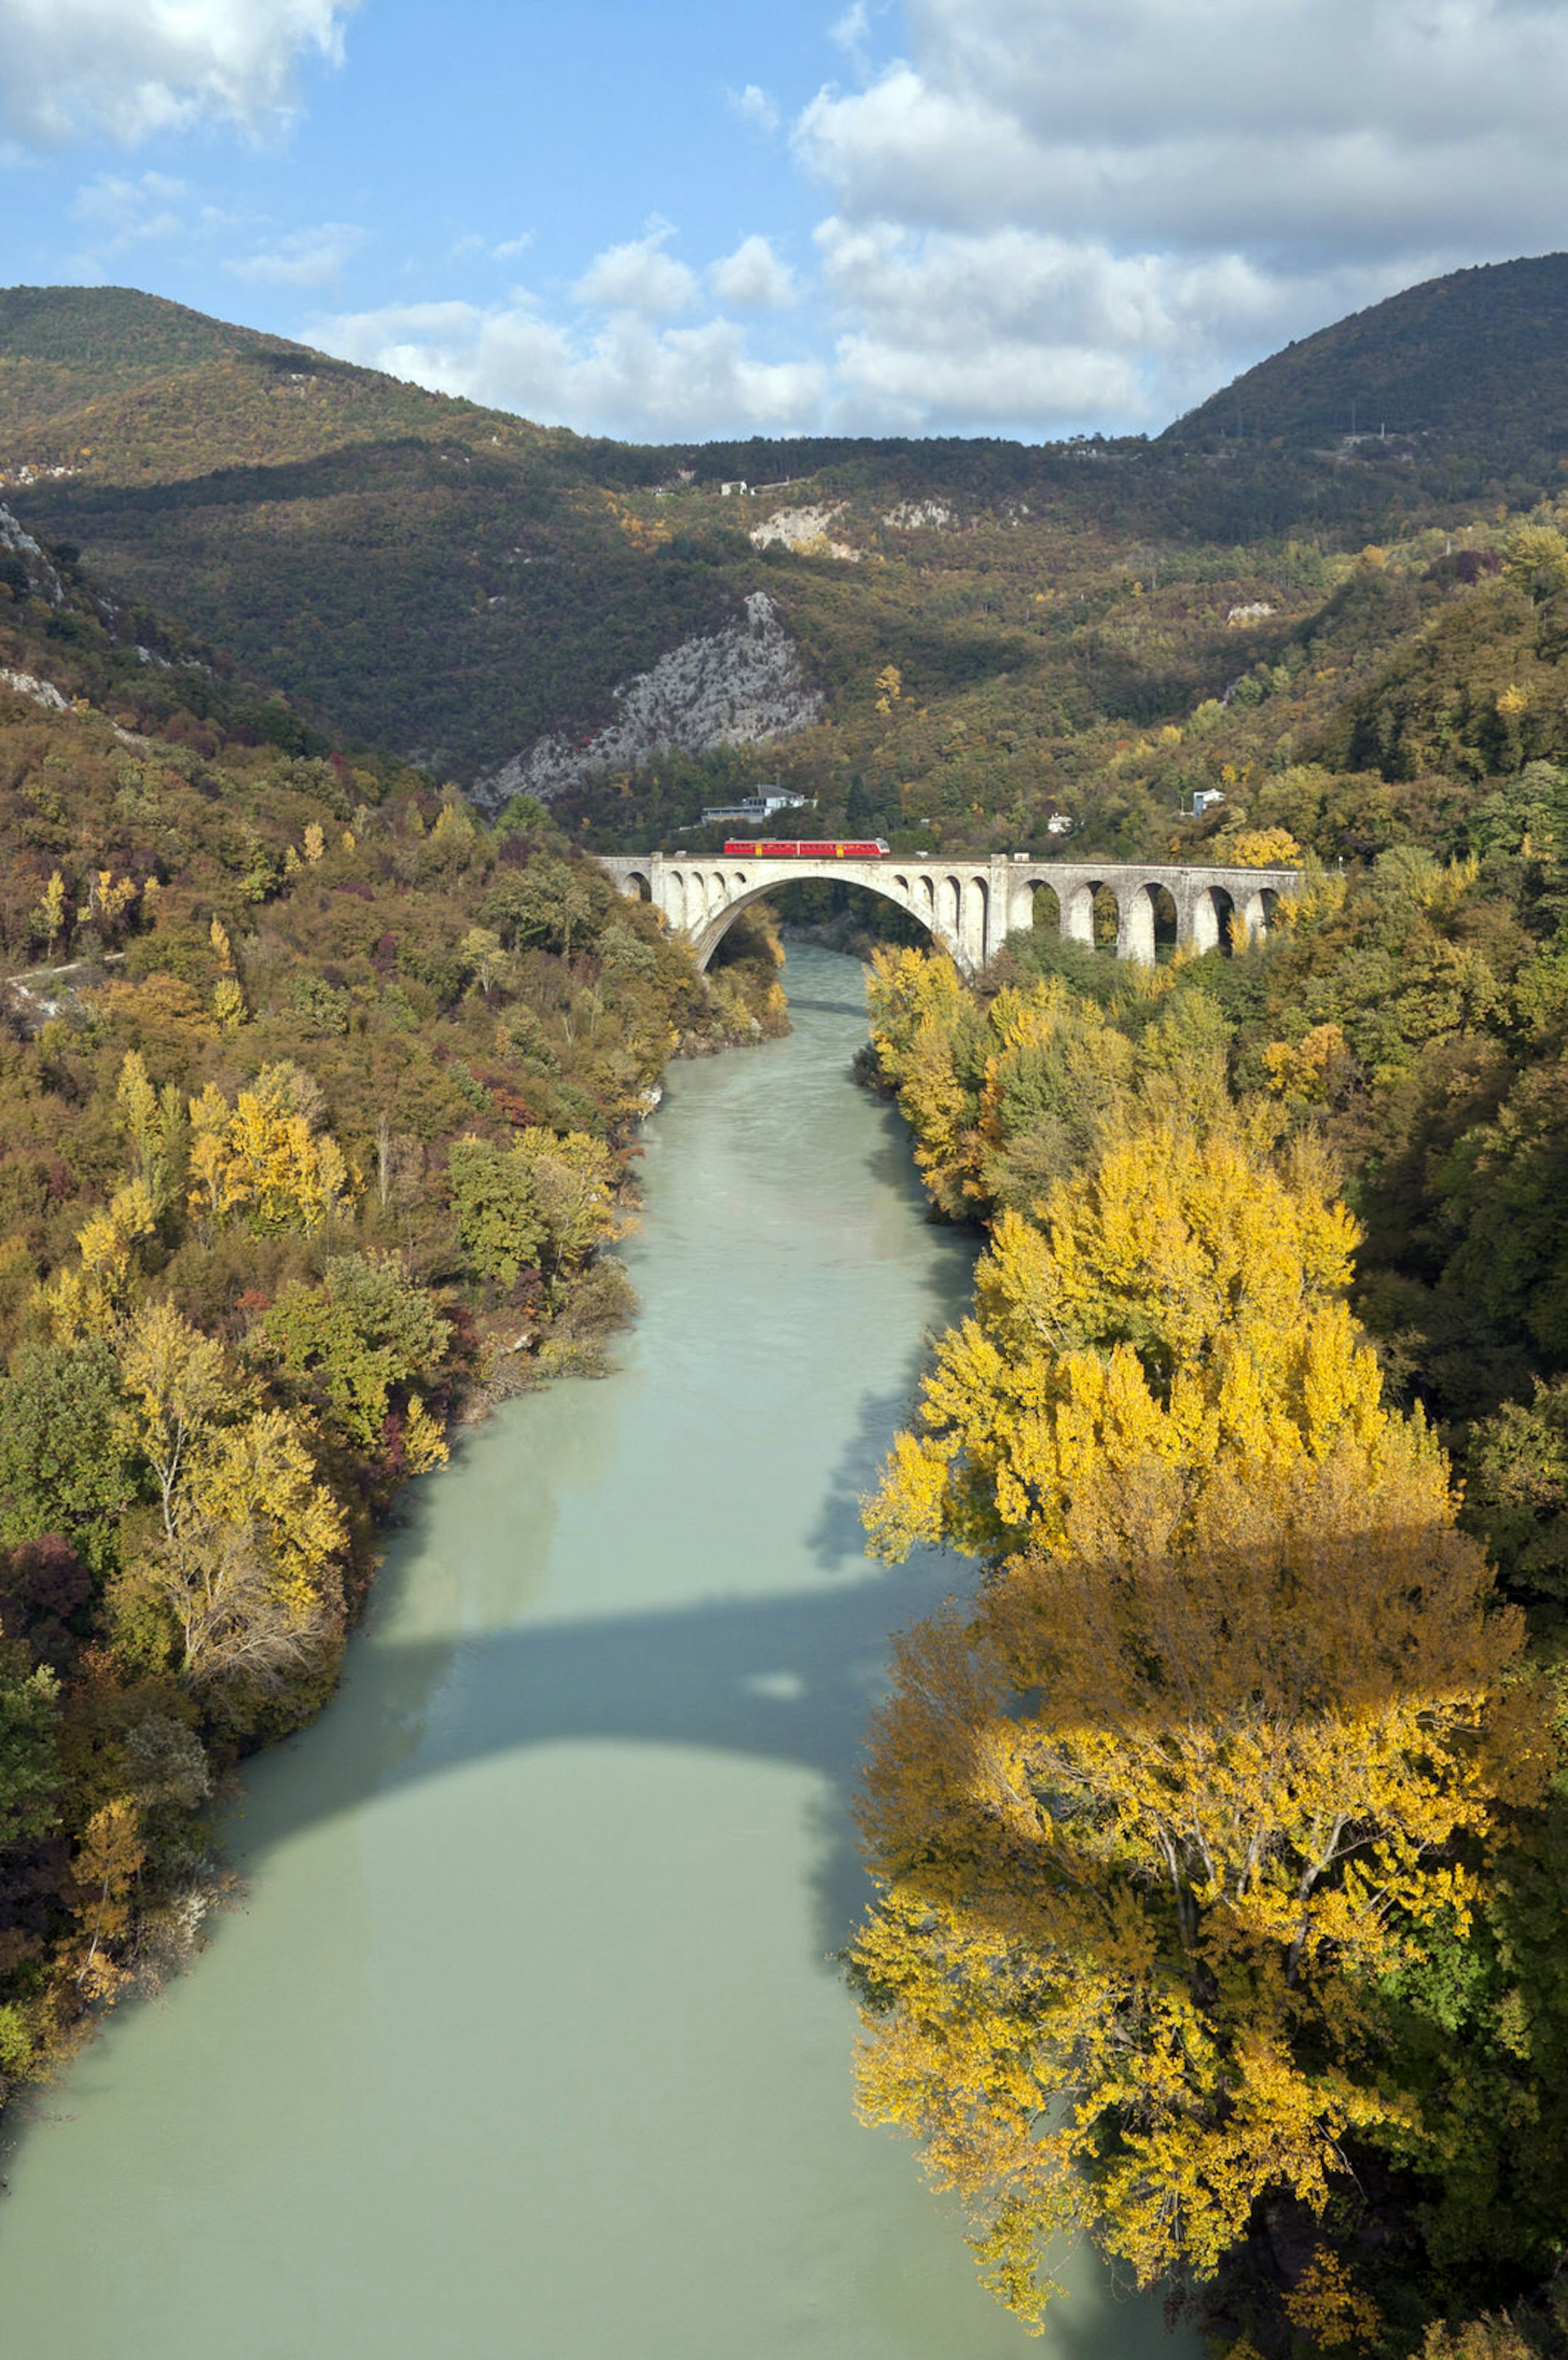 A train crosses the Soča River, Slovenia © Ababsolutum / Getty Images